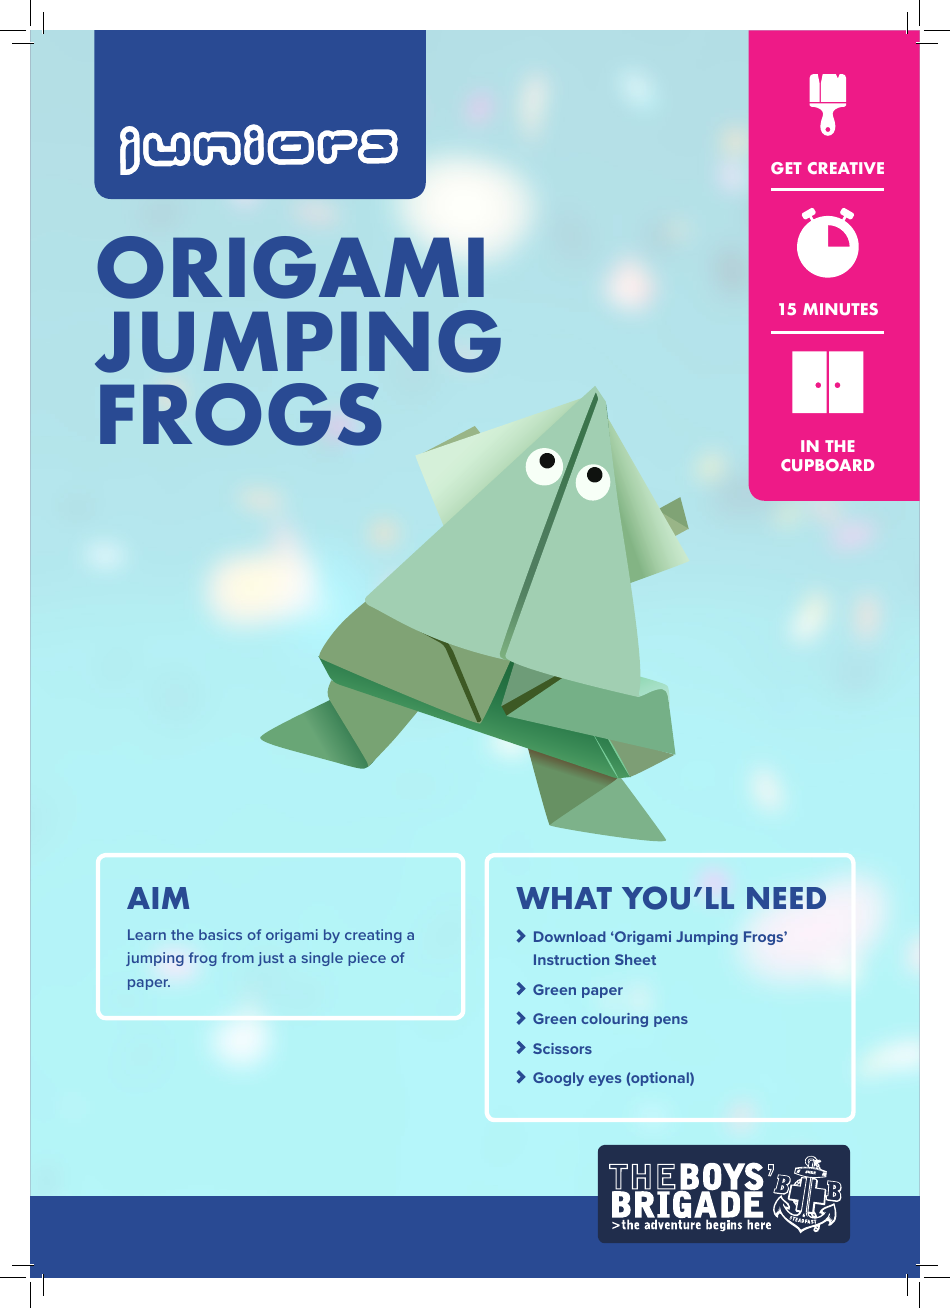 Origami Jumping Frog Guide for Juniors